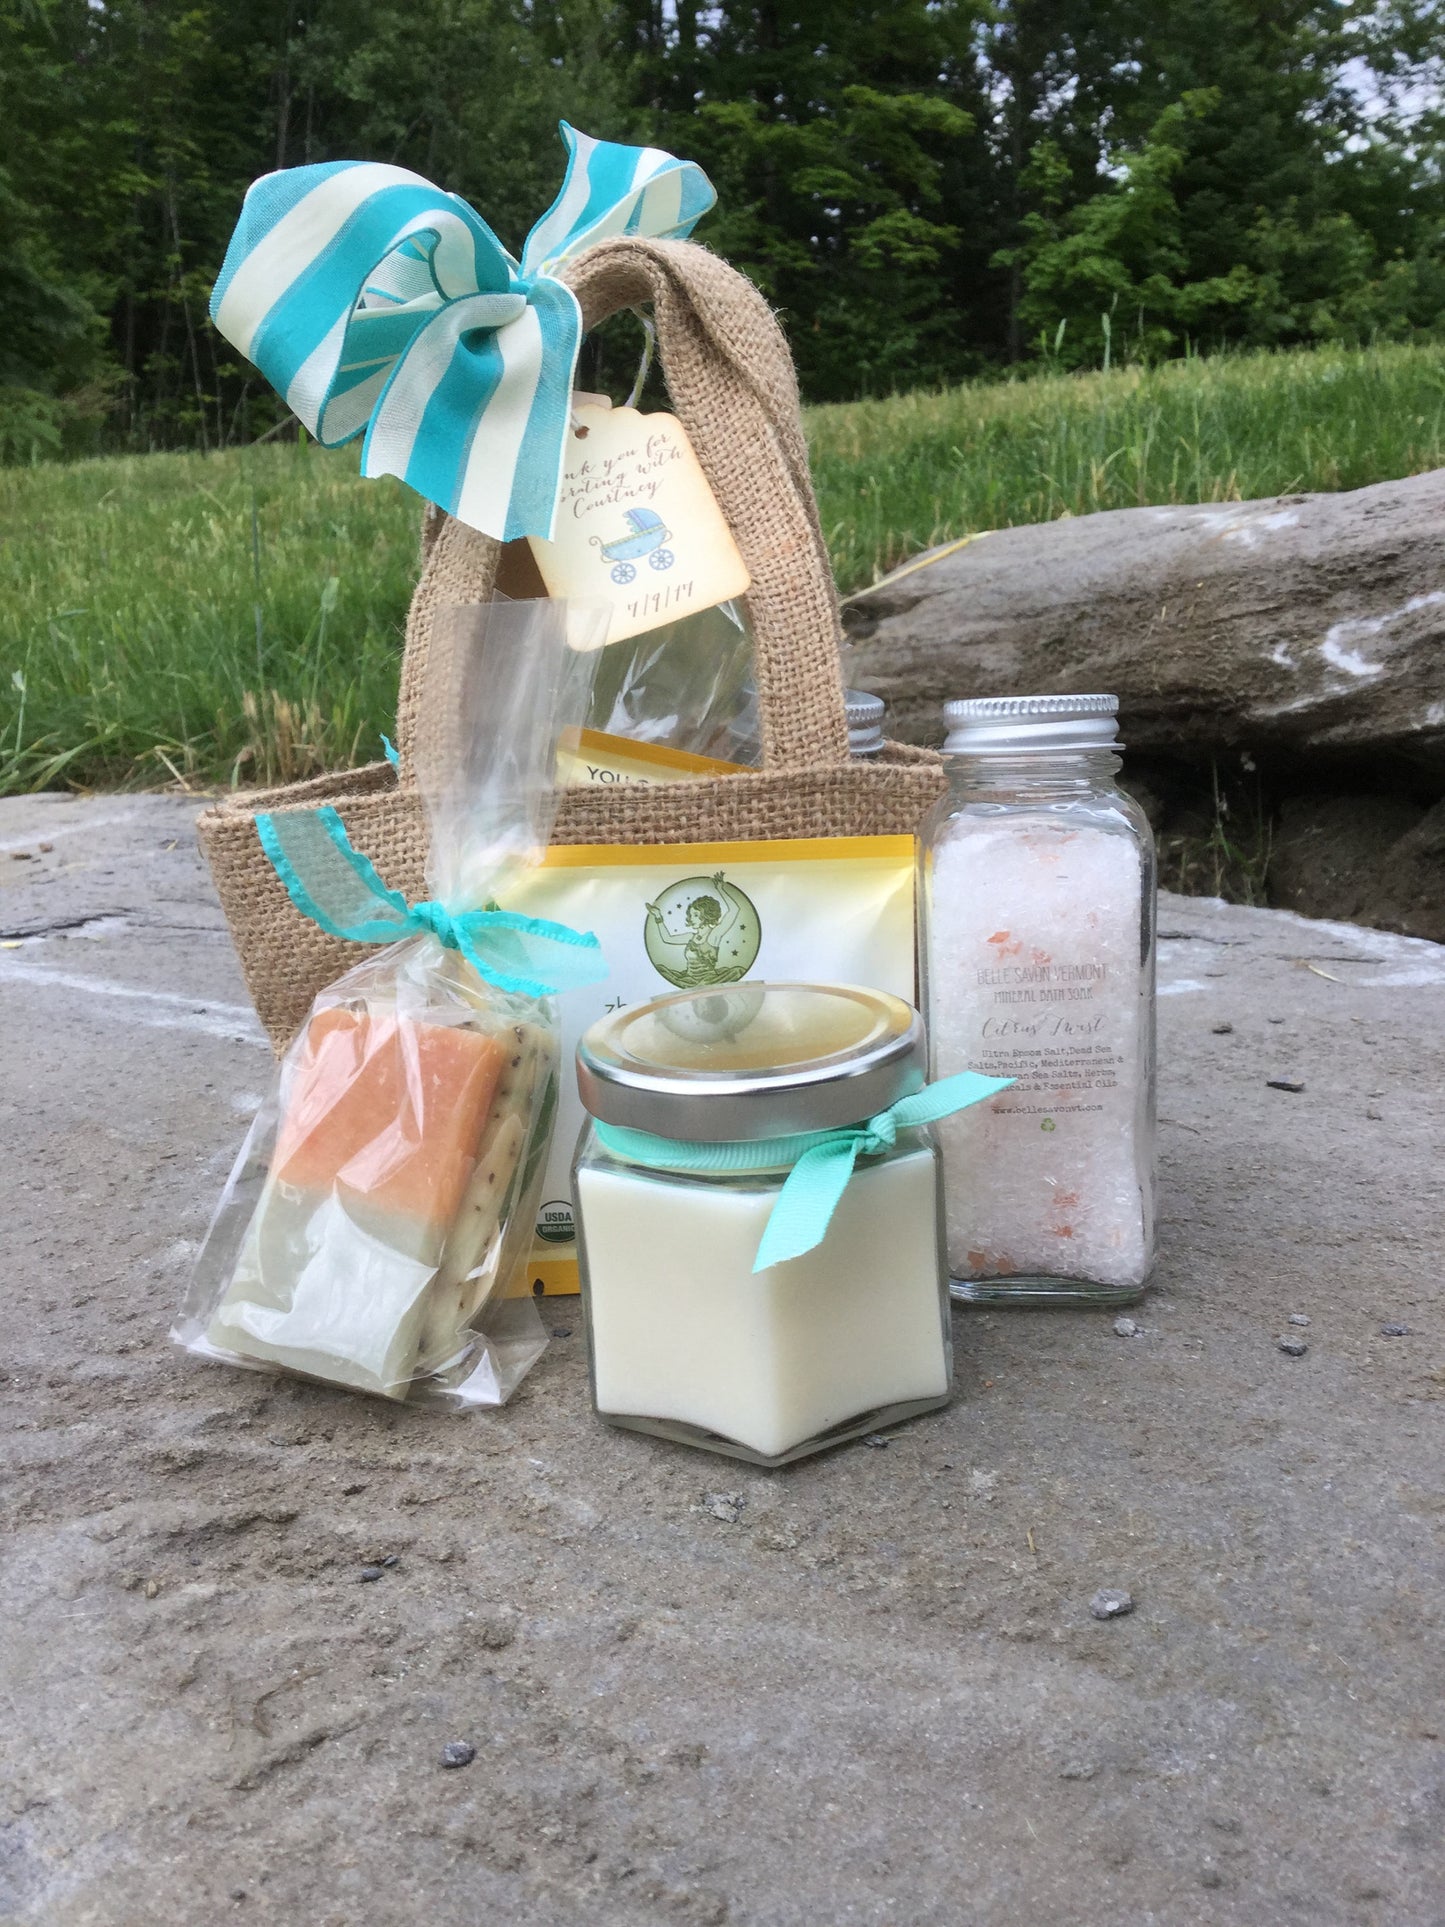 Pamper Me Spa Set with Mineral Bath, Soap, Candle and Tea -Artisan Soap and Bath Salts-Weddings-Bridal-Baby Showers-Belle Savon Vermont